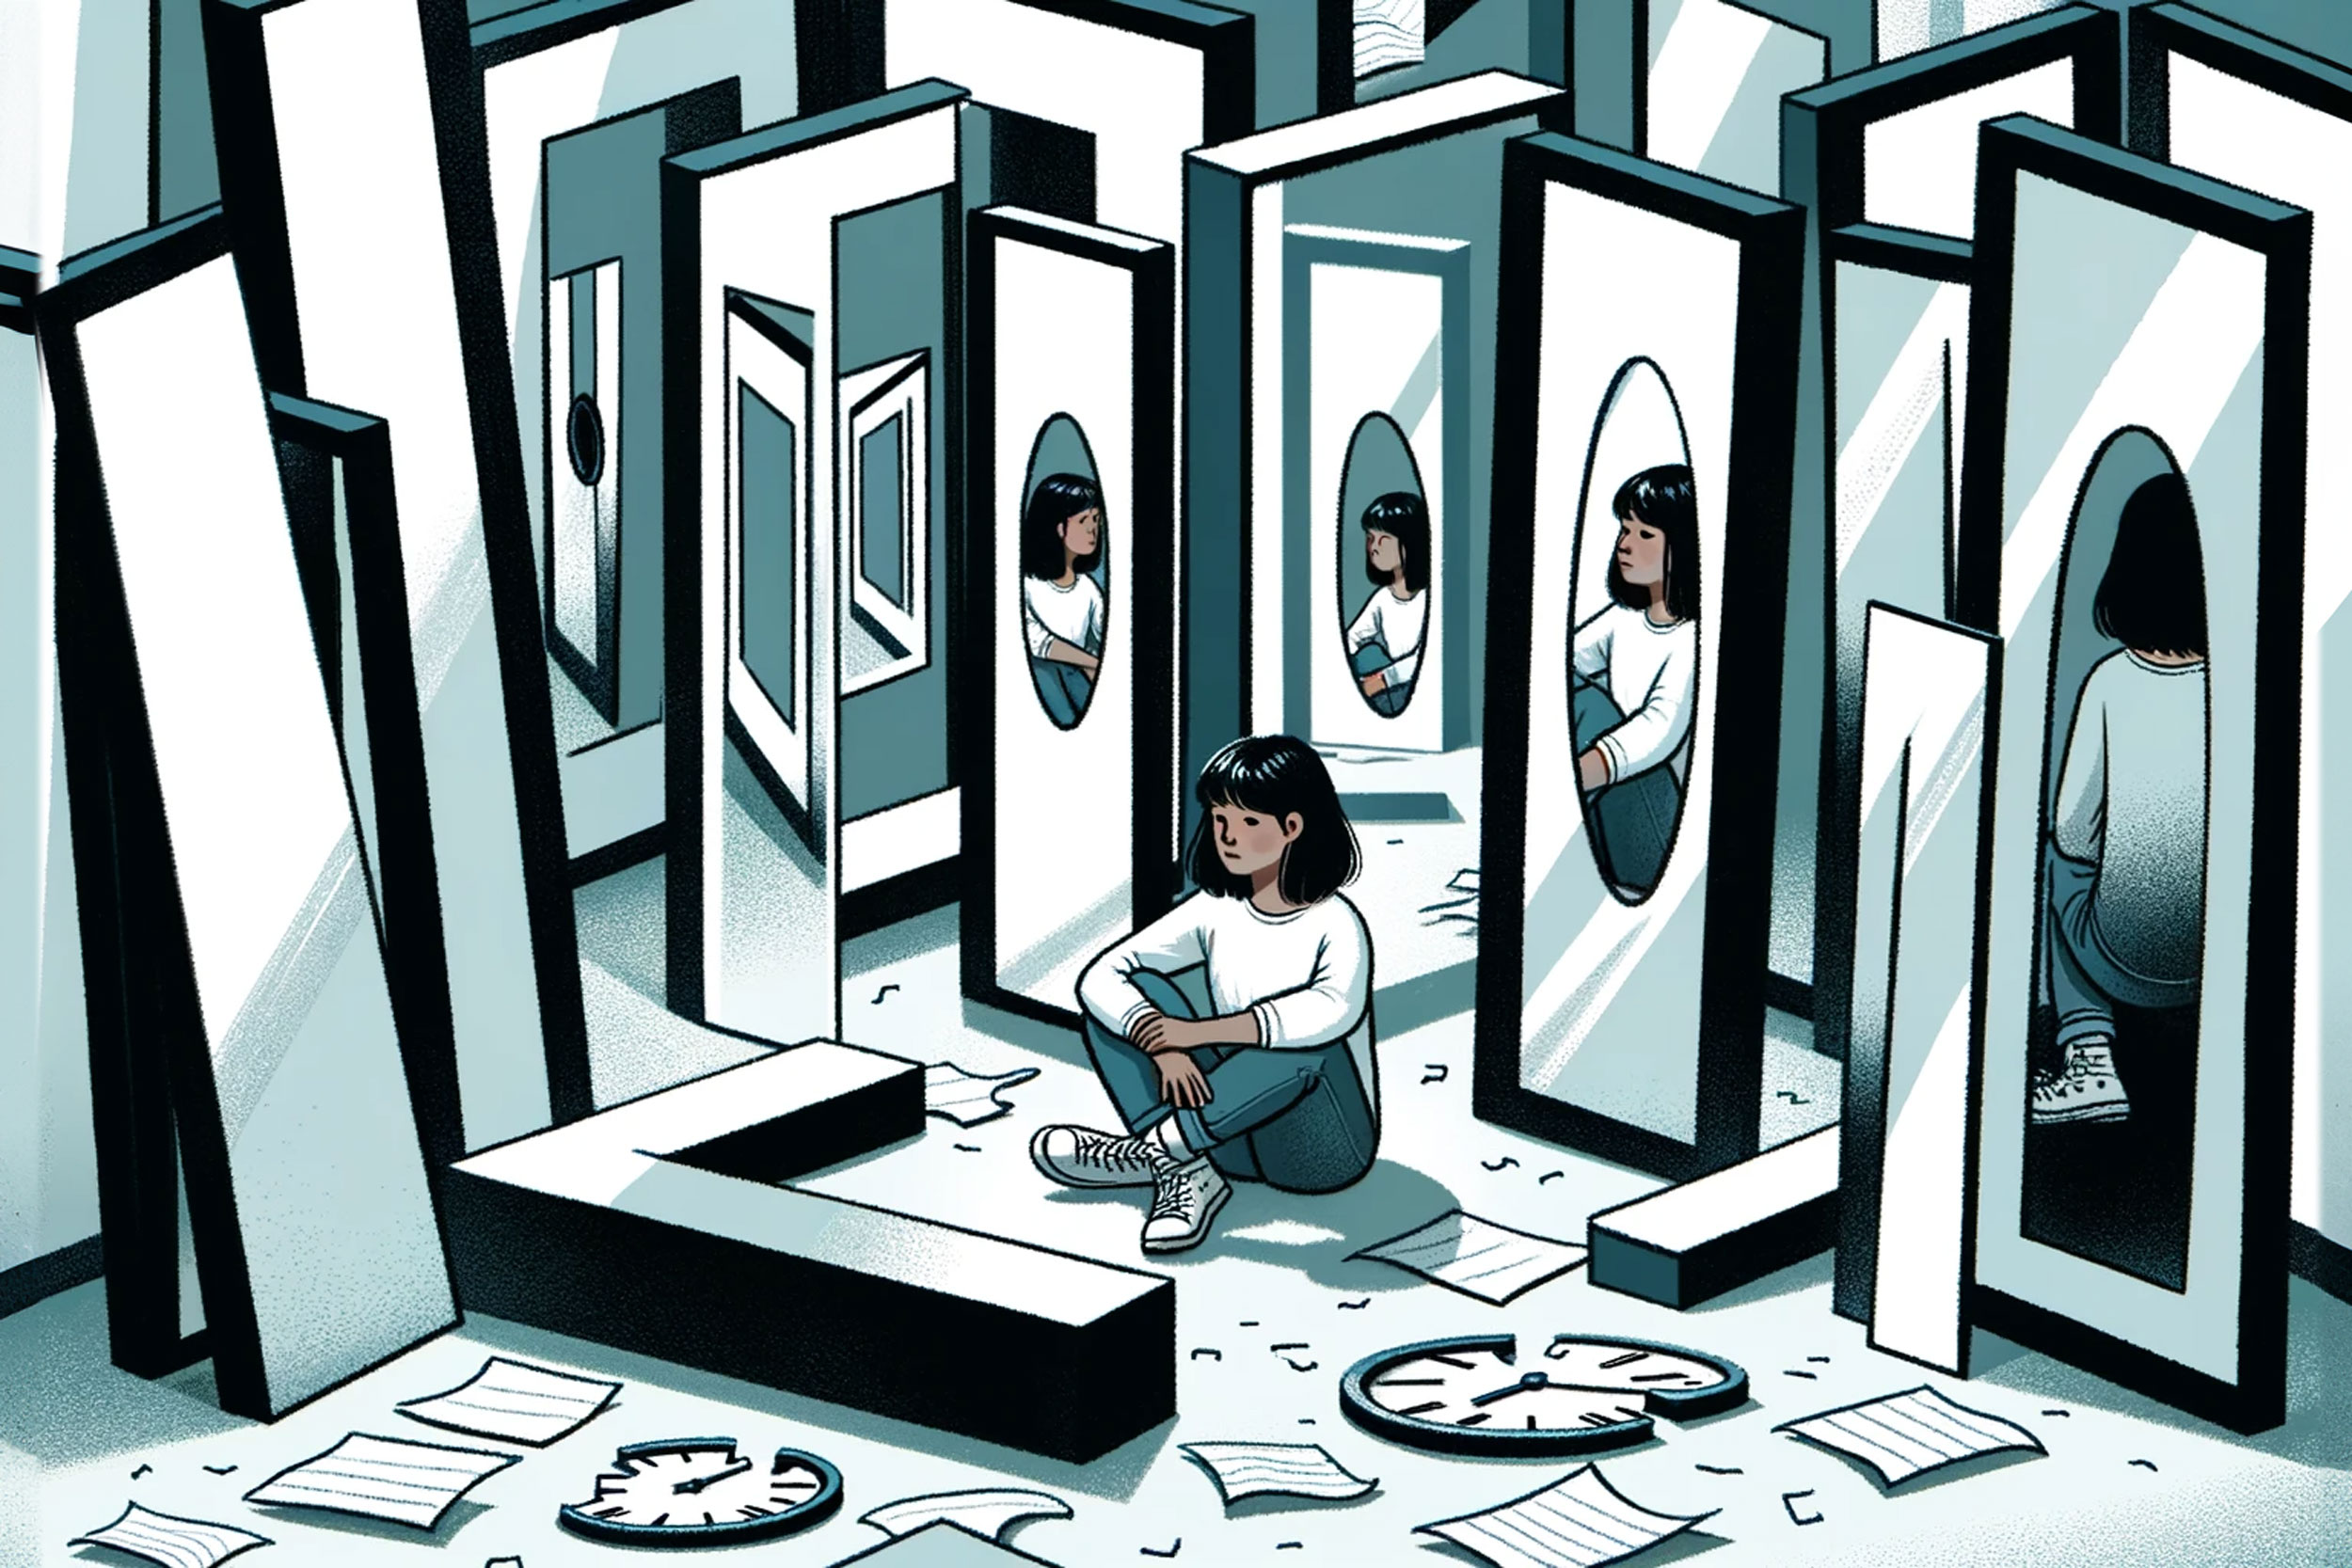 An illustration of a girl sitting on the floor in front of mirrors.